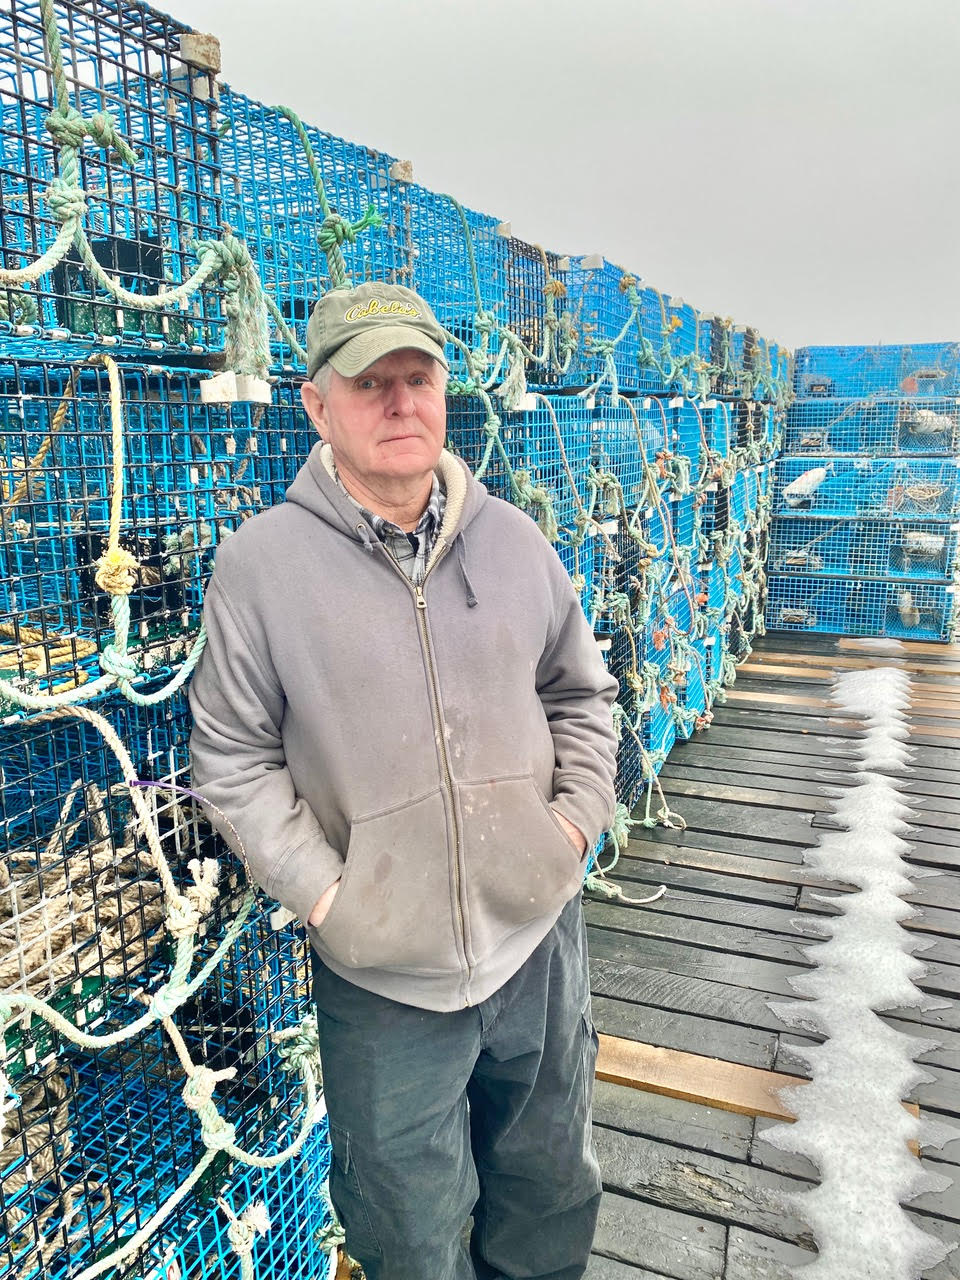 Person leaning against lobster crates on wooden dockdock